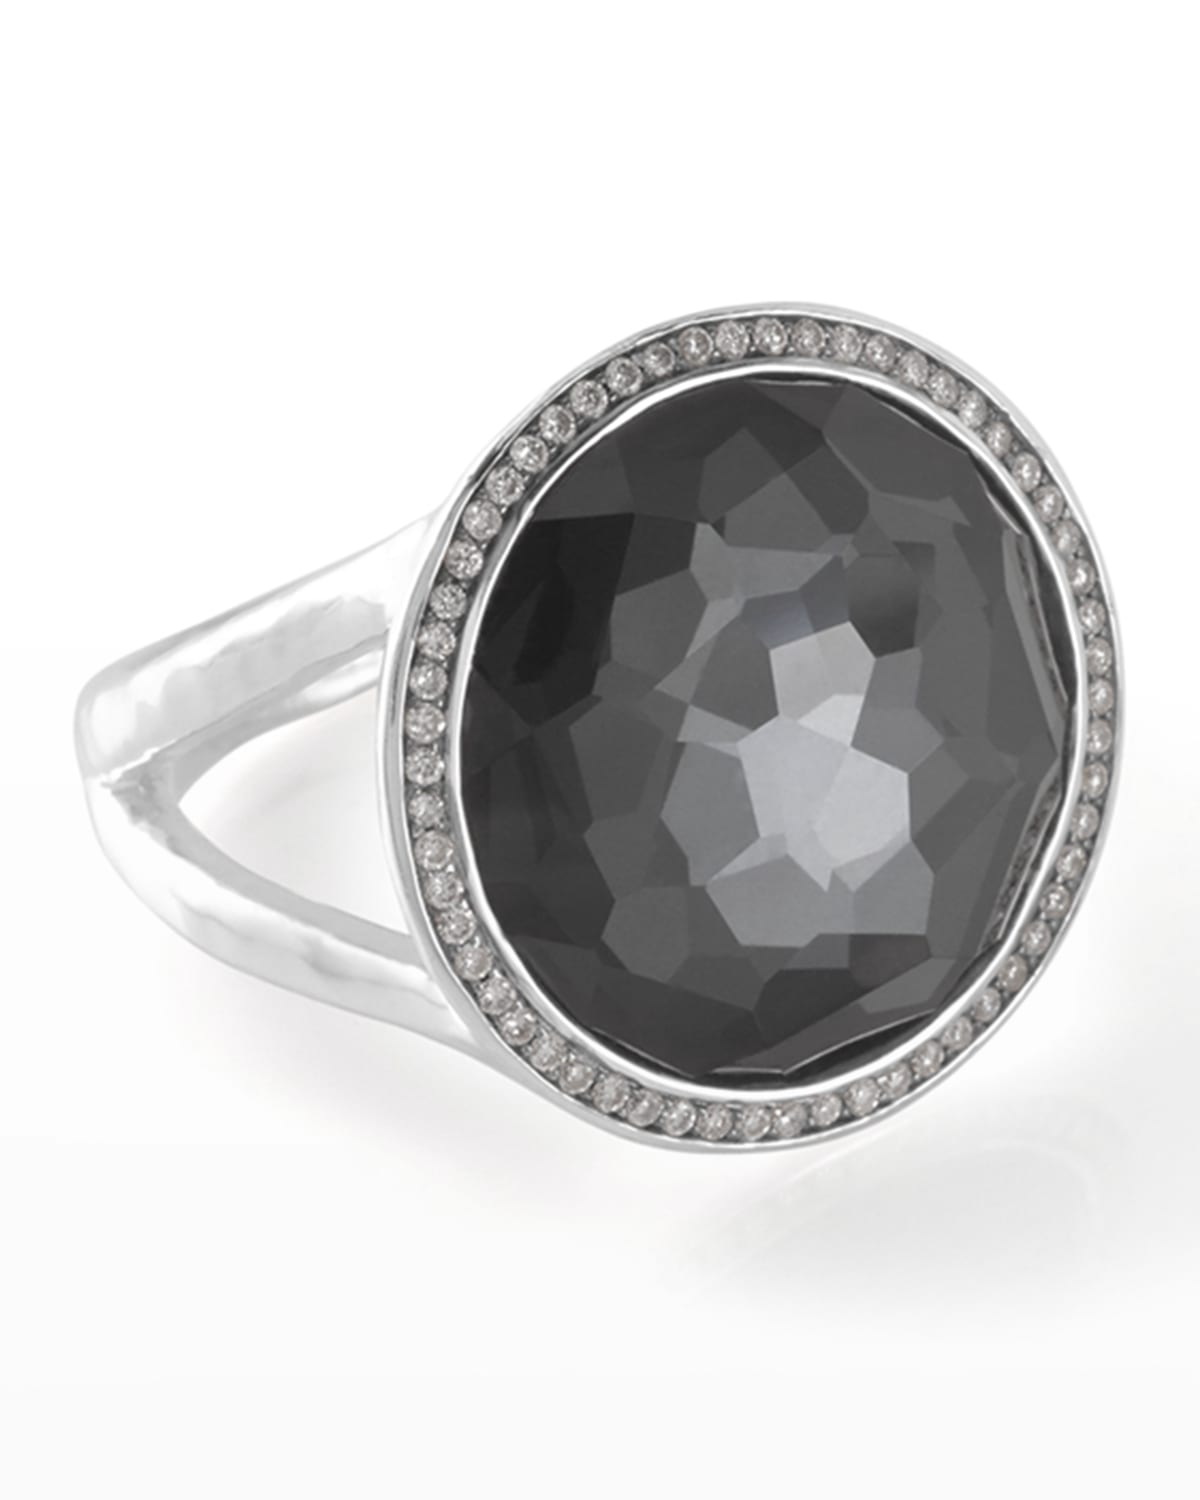 IPPOLITA MEDIUM RING IN STERLING SILVER WITH DIAMONDS